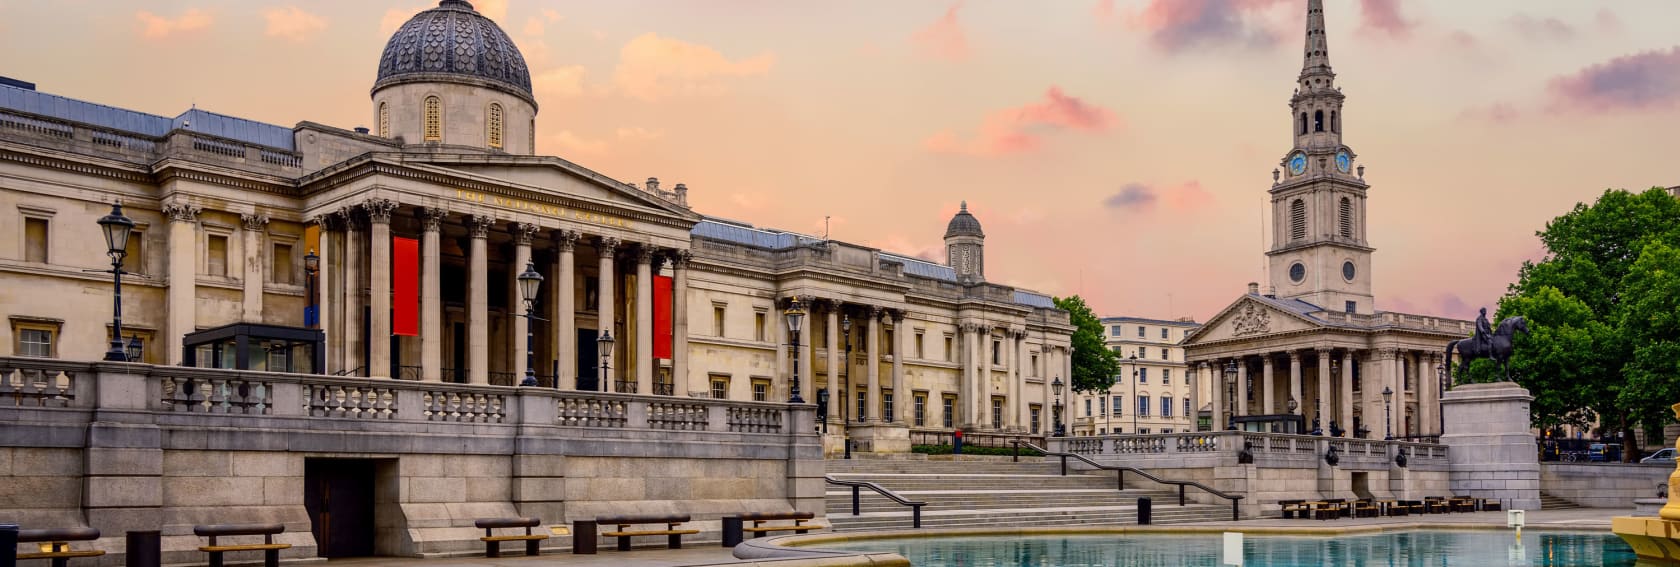 The London National Gallery Museum